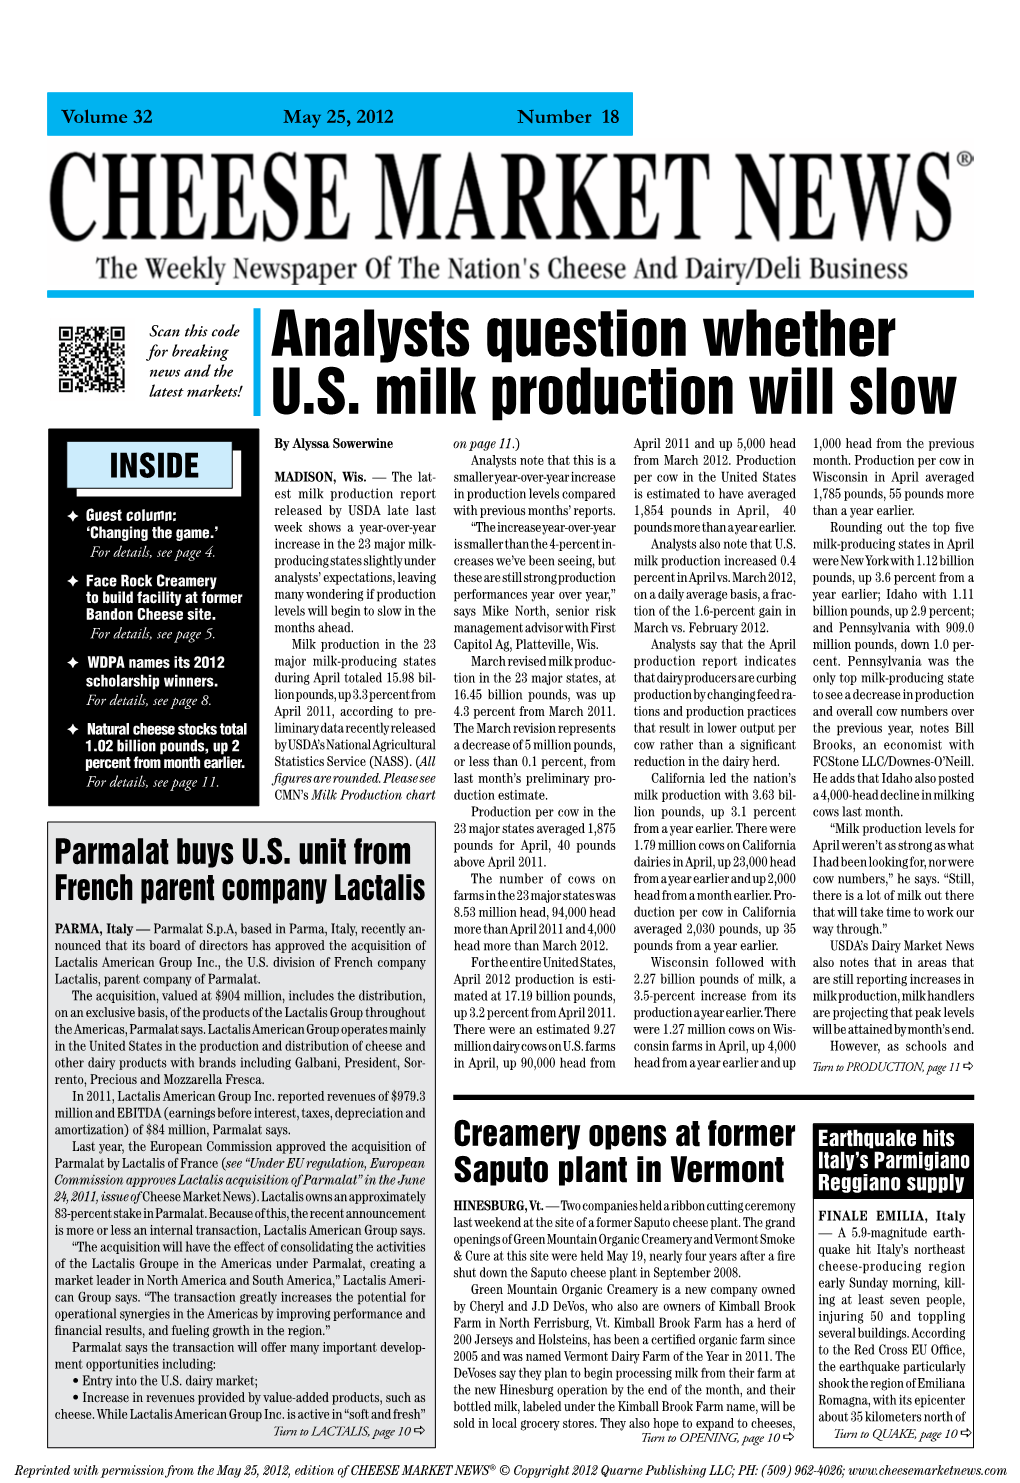 Analysts Question Whether U.S. Milk Production Will Slow